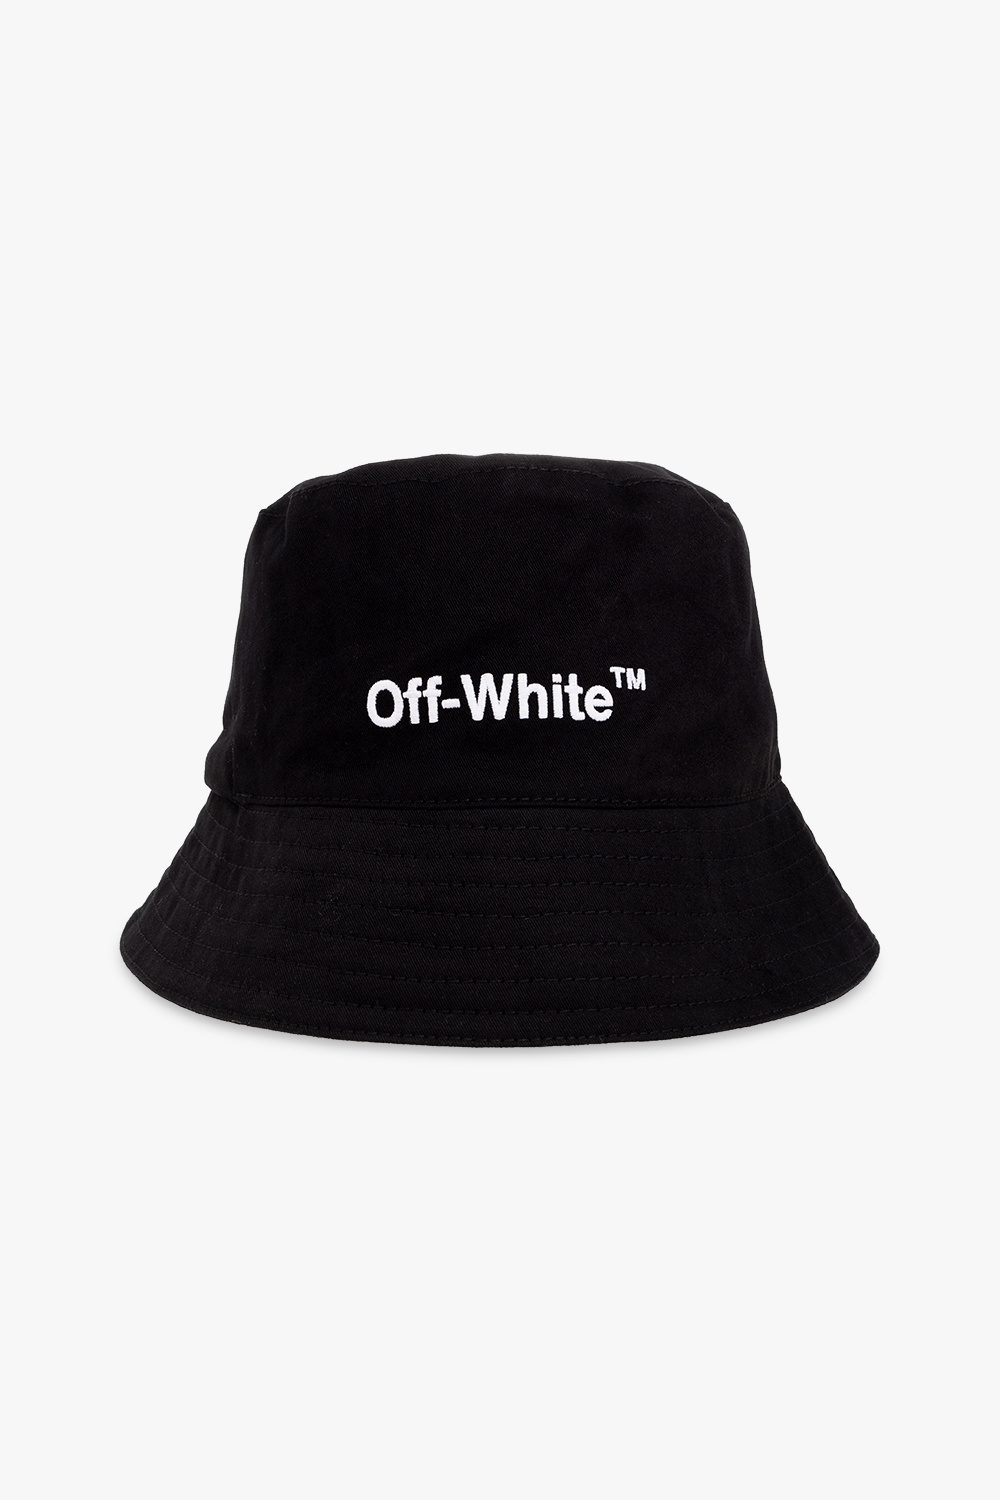 Off-White Bucket royal hat with logo